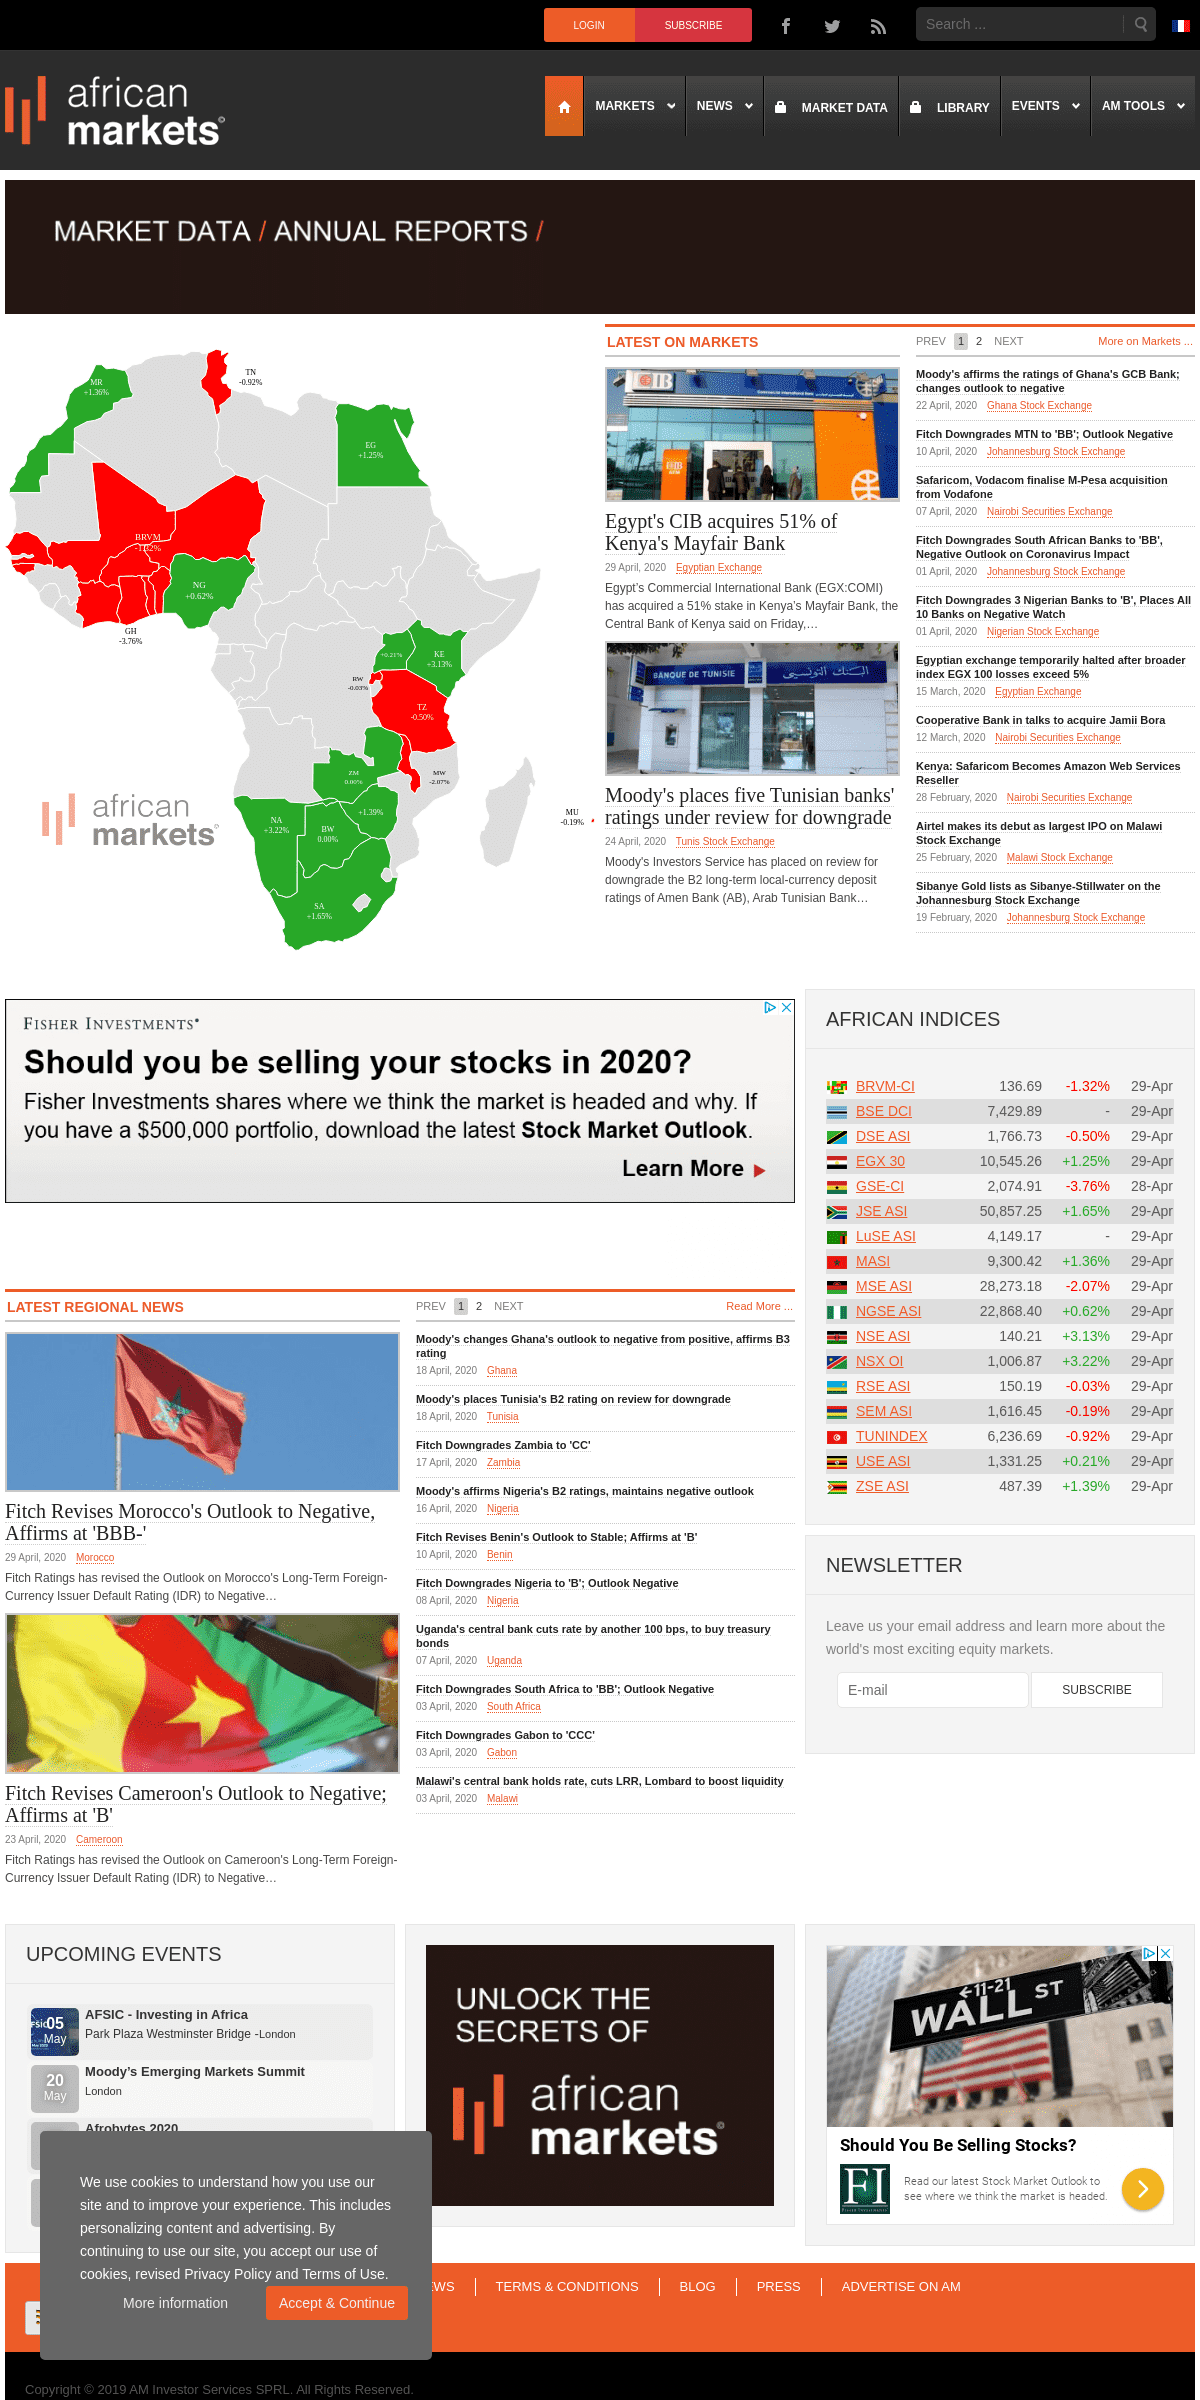 A complete backup of african-markets.com